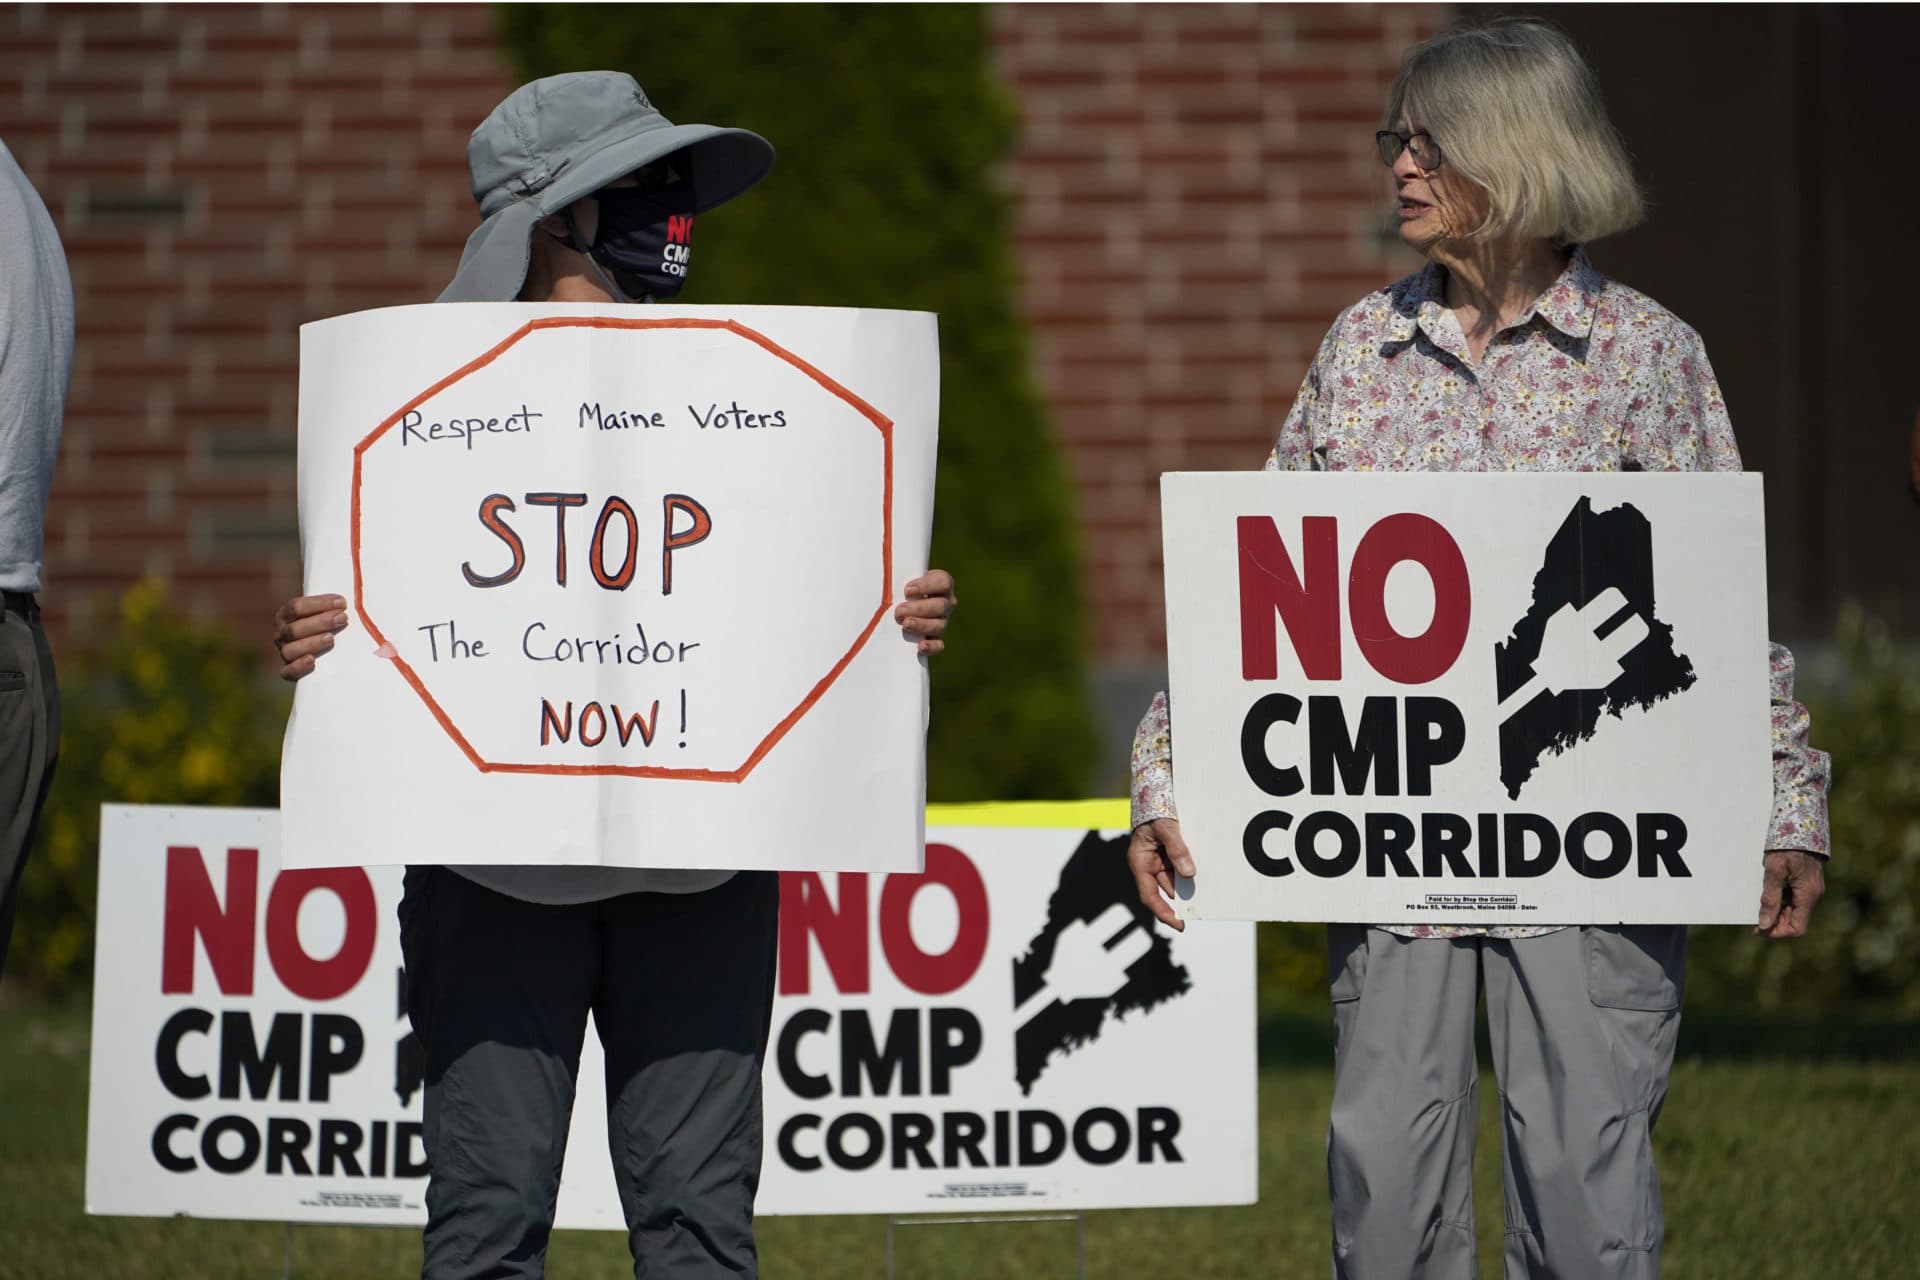 Protesters hold signs outside the Augusta Civic Center where a state meeting on Central Maine Power's proposed hydropower corridor is taking place, July 20, 2022, in Augusta, Maine. Voters rejected the corridor in November. (Robert F. Bukaty/AP)